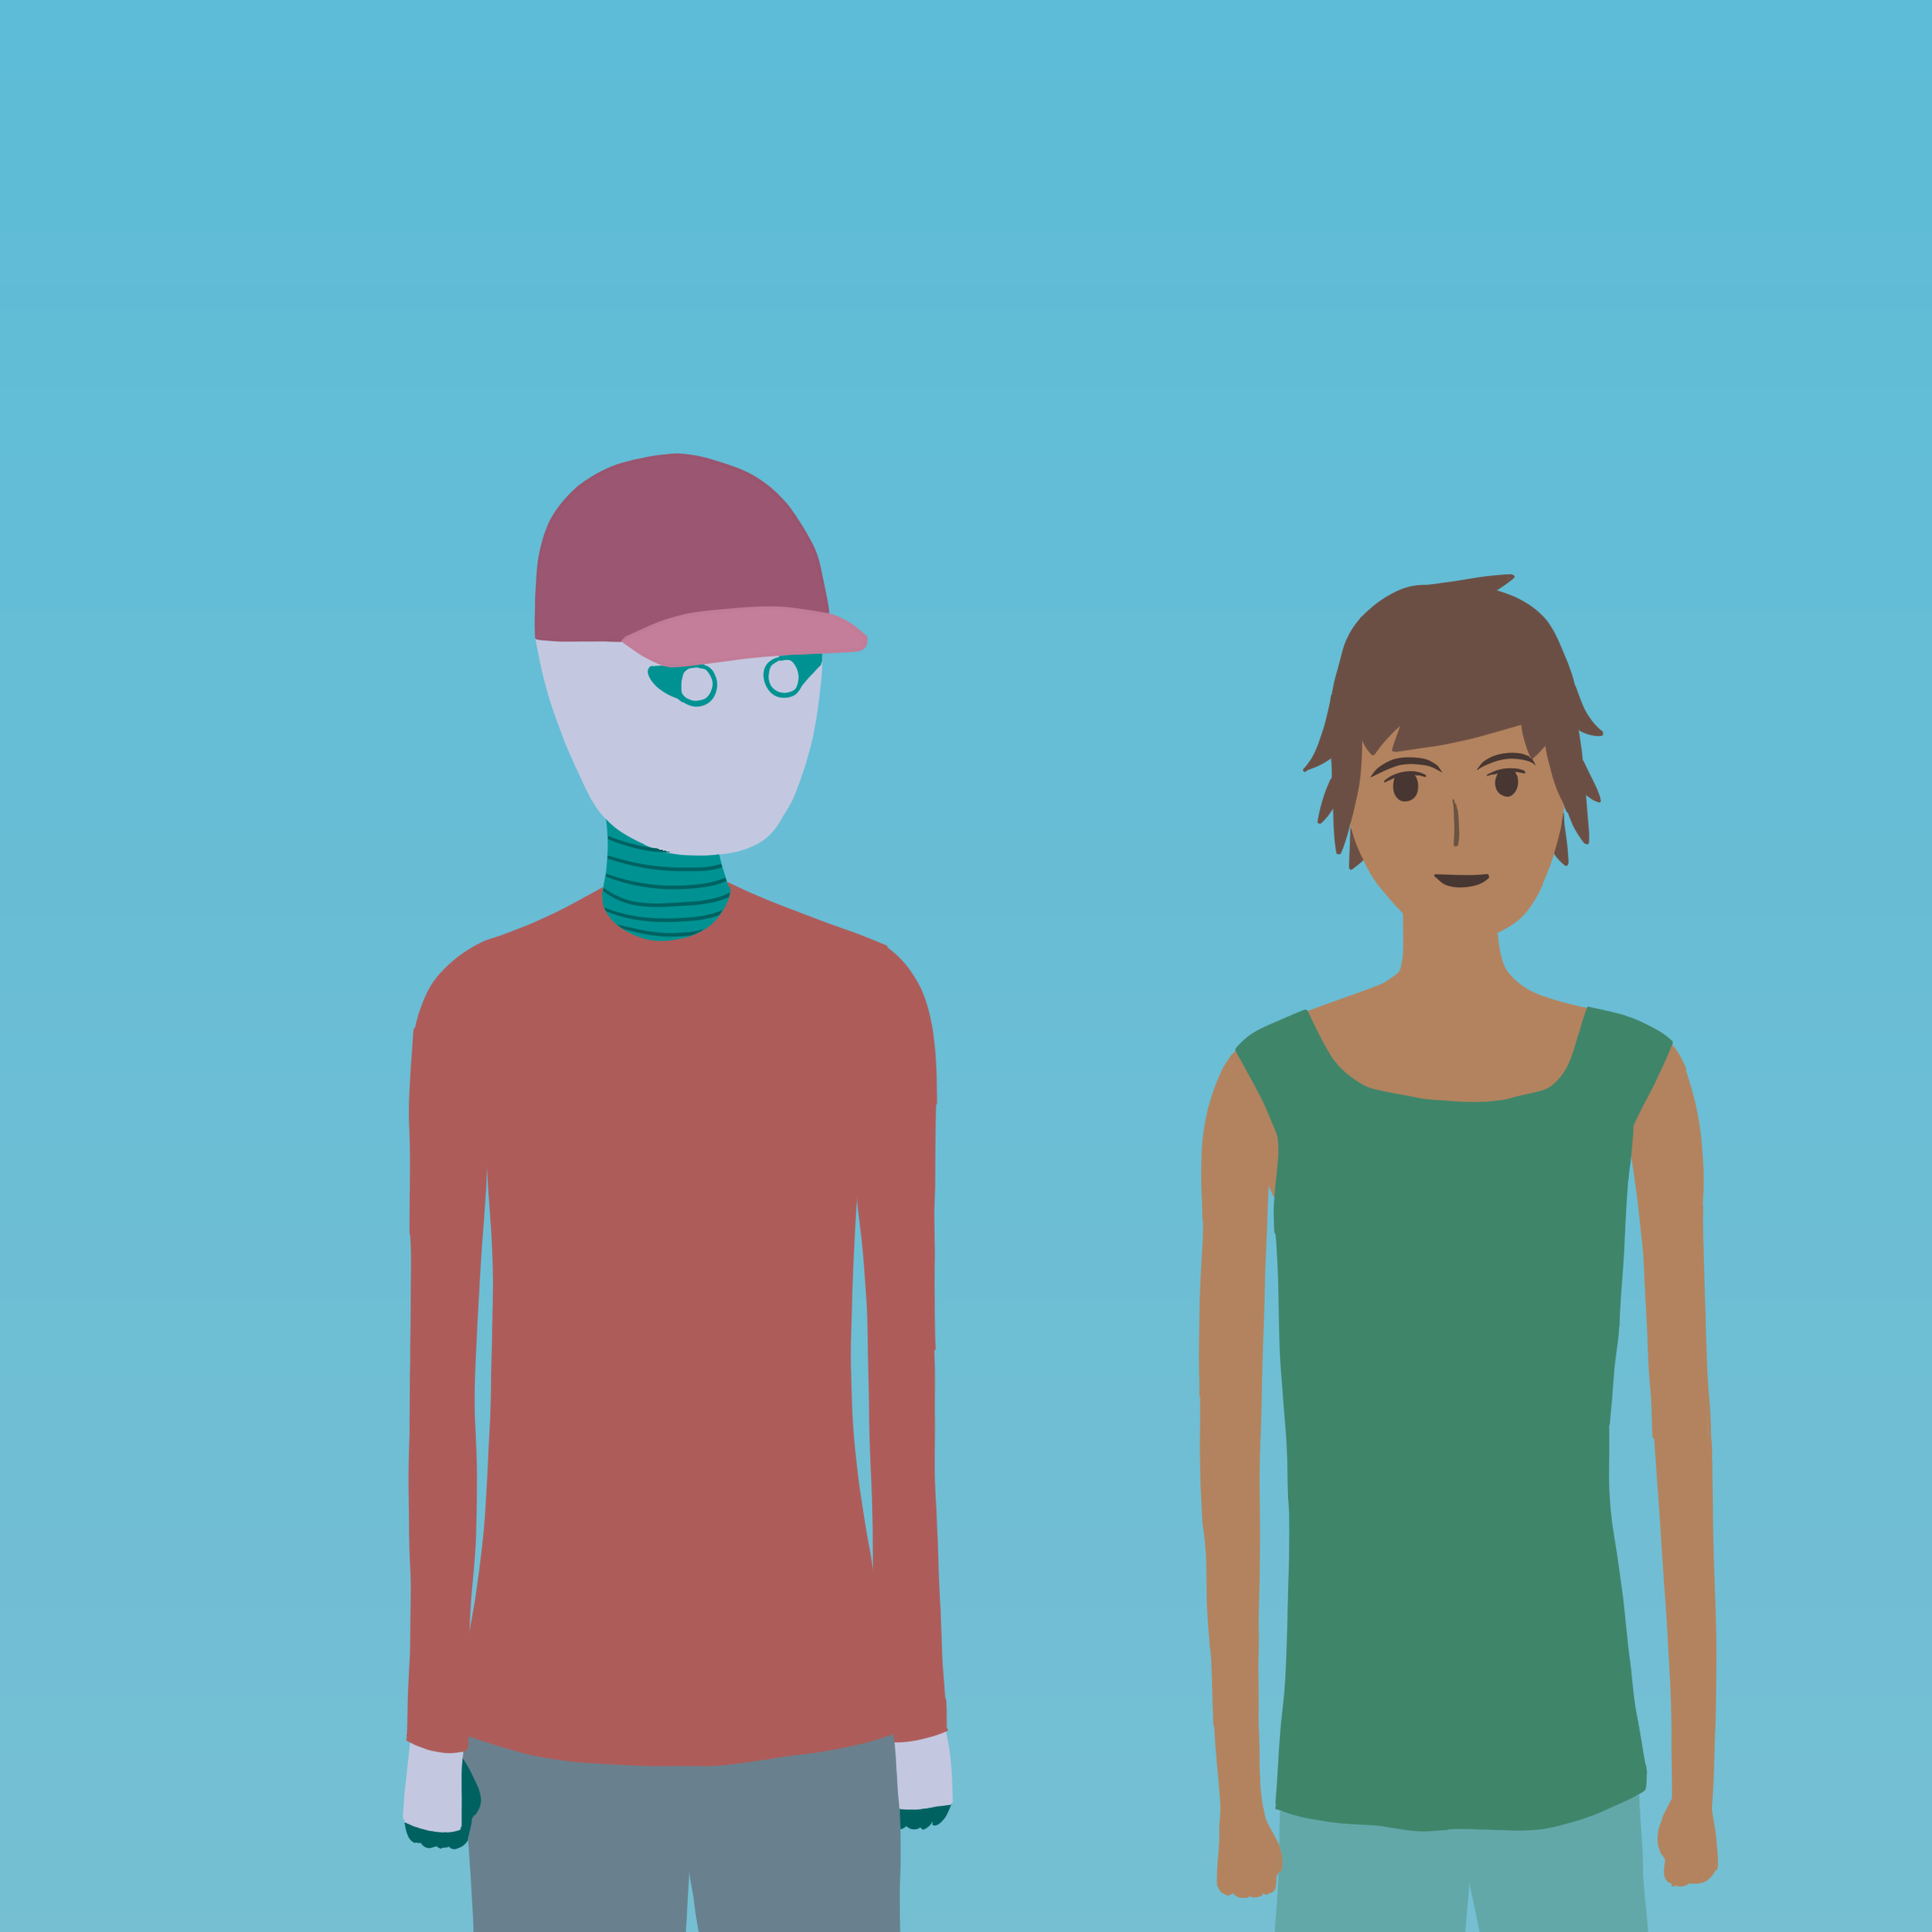 A robot named Rova and a human named Evi standing outside together.